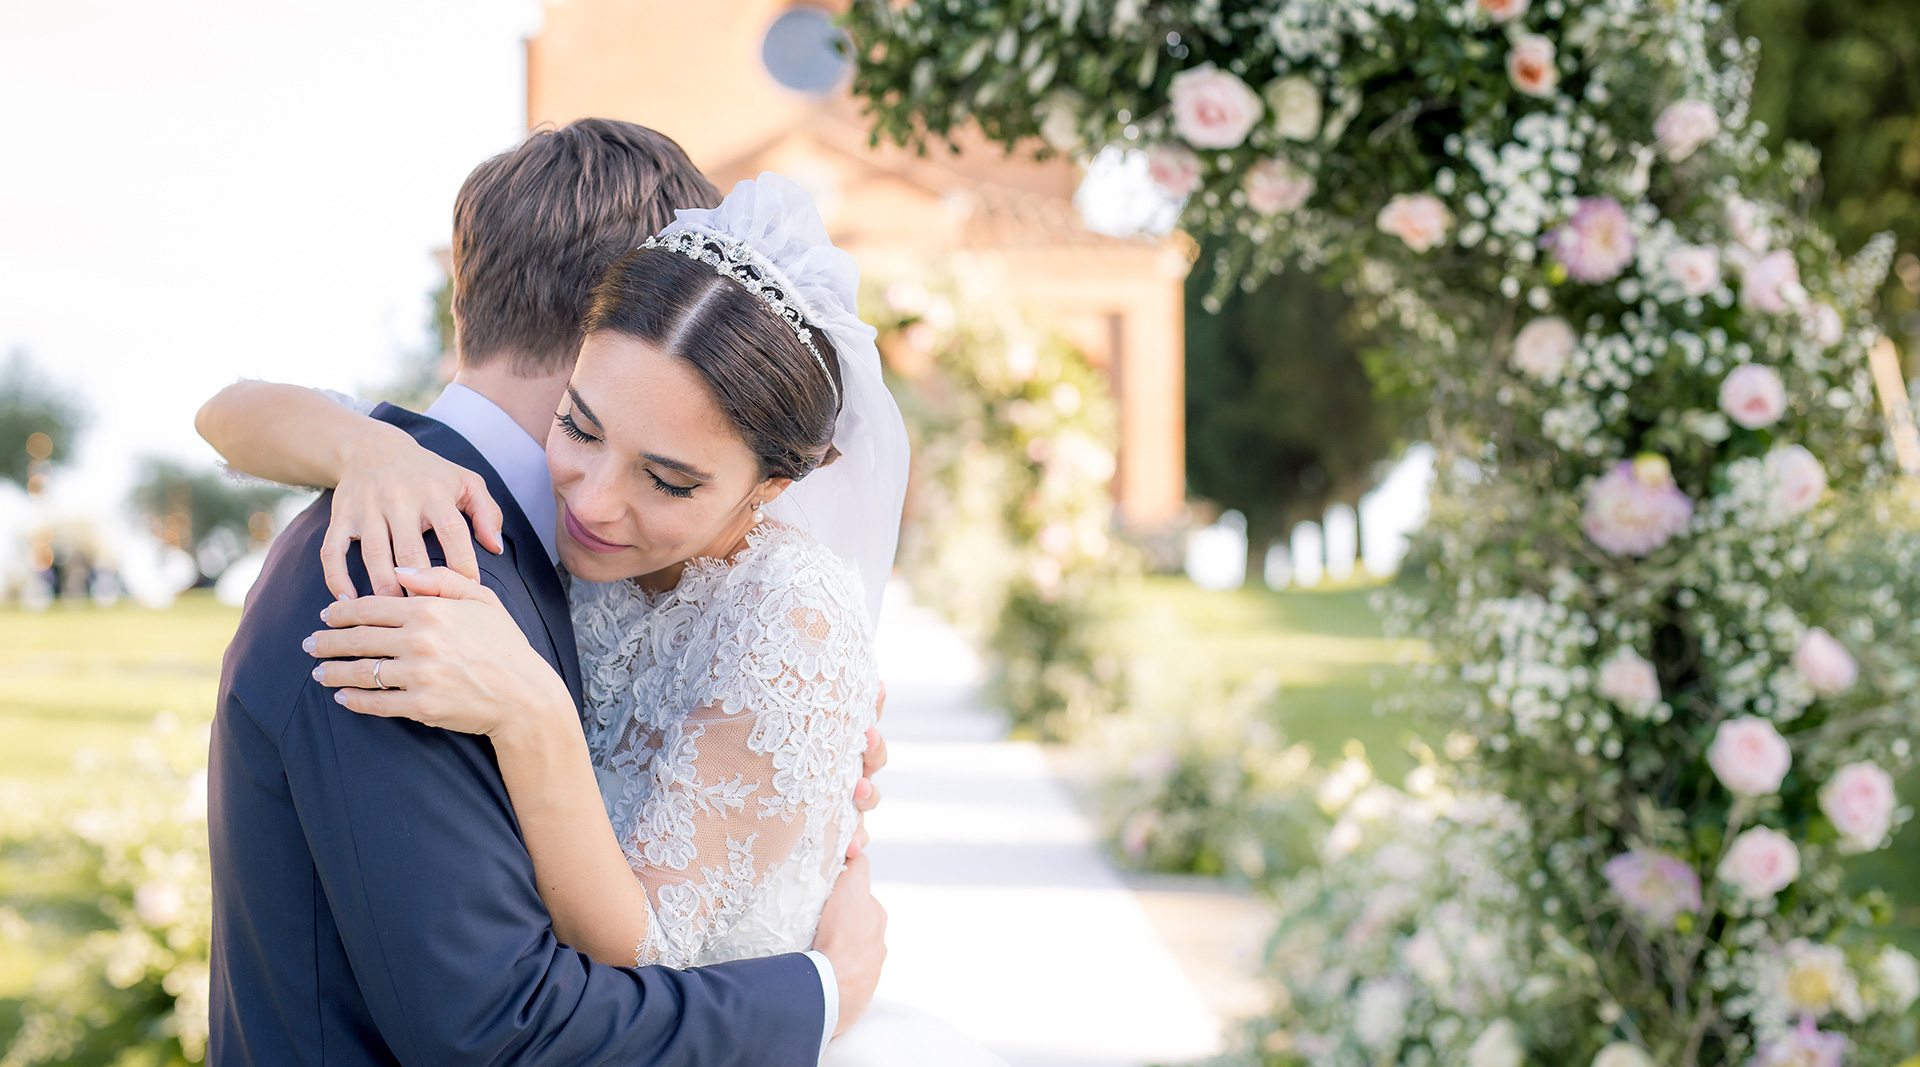 romantic wedding in tuscany, amidst hills and luxurious settings